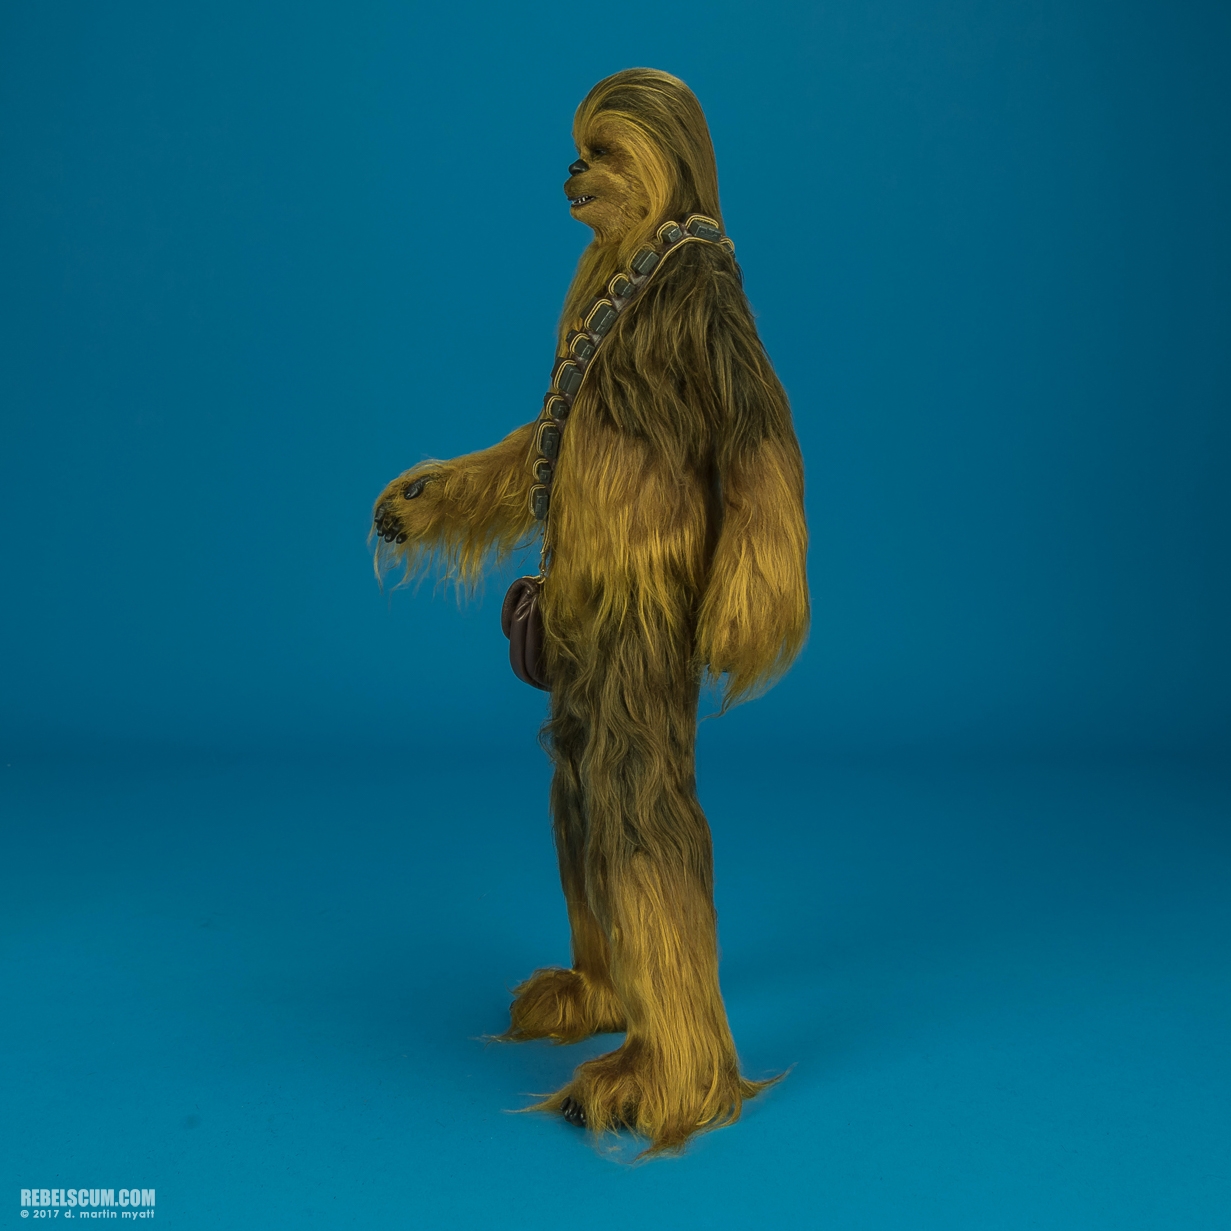 MMS376-Han-Solo-Chewbacca-The-Force-Awakens-Hot-Toys-015.jpg